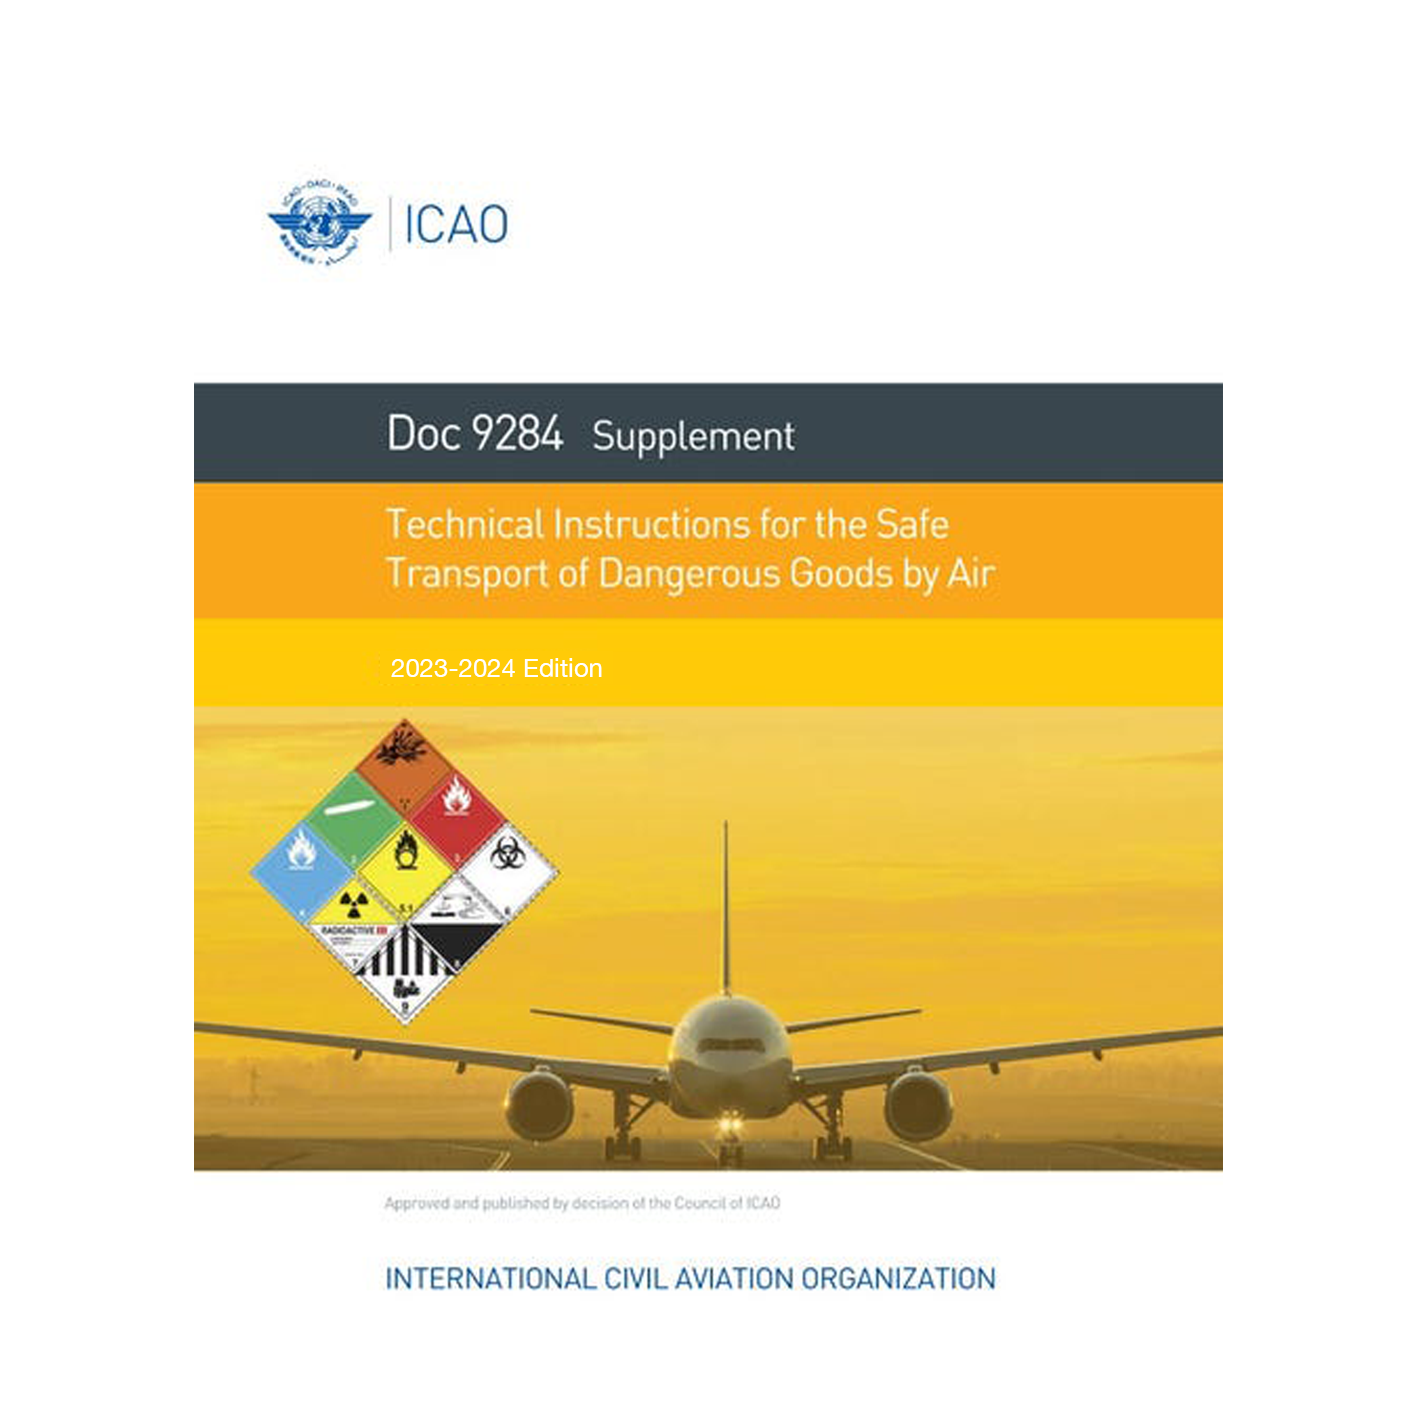 Supplement to the ICAO, 2023-2024 Edition